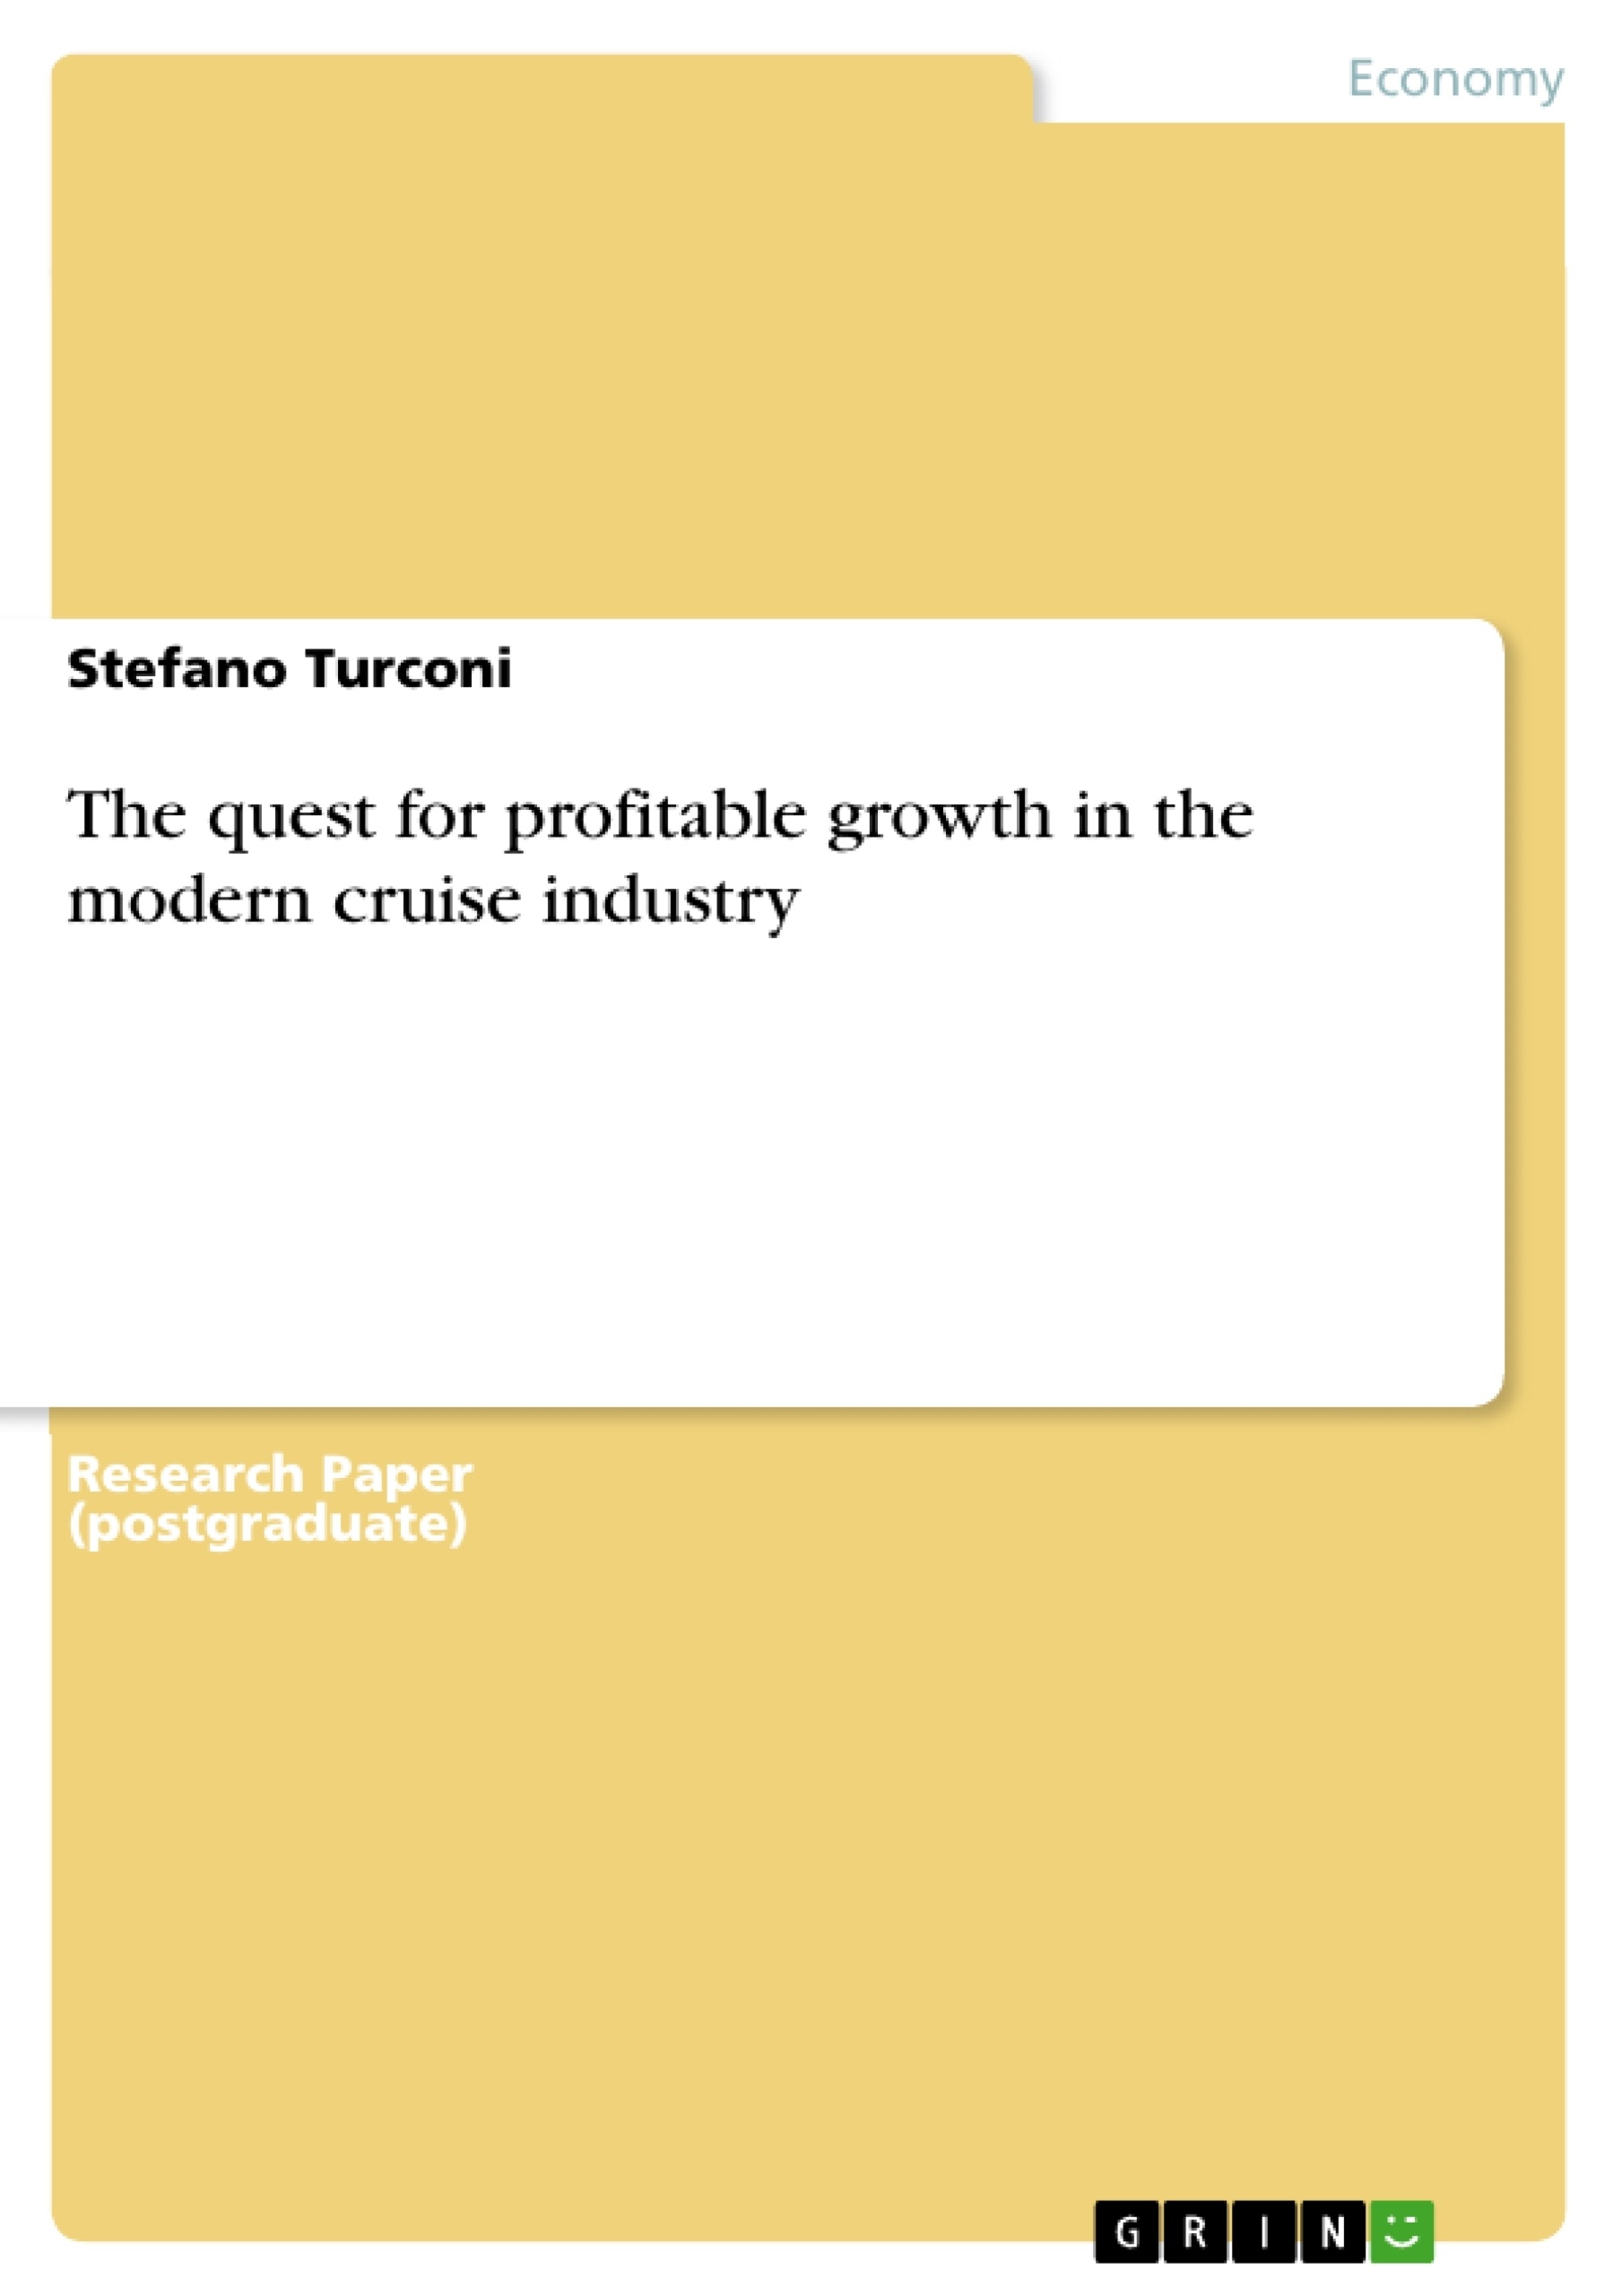 Title: The quest for profitable growth in the modern cruise industry